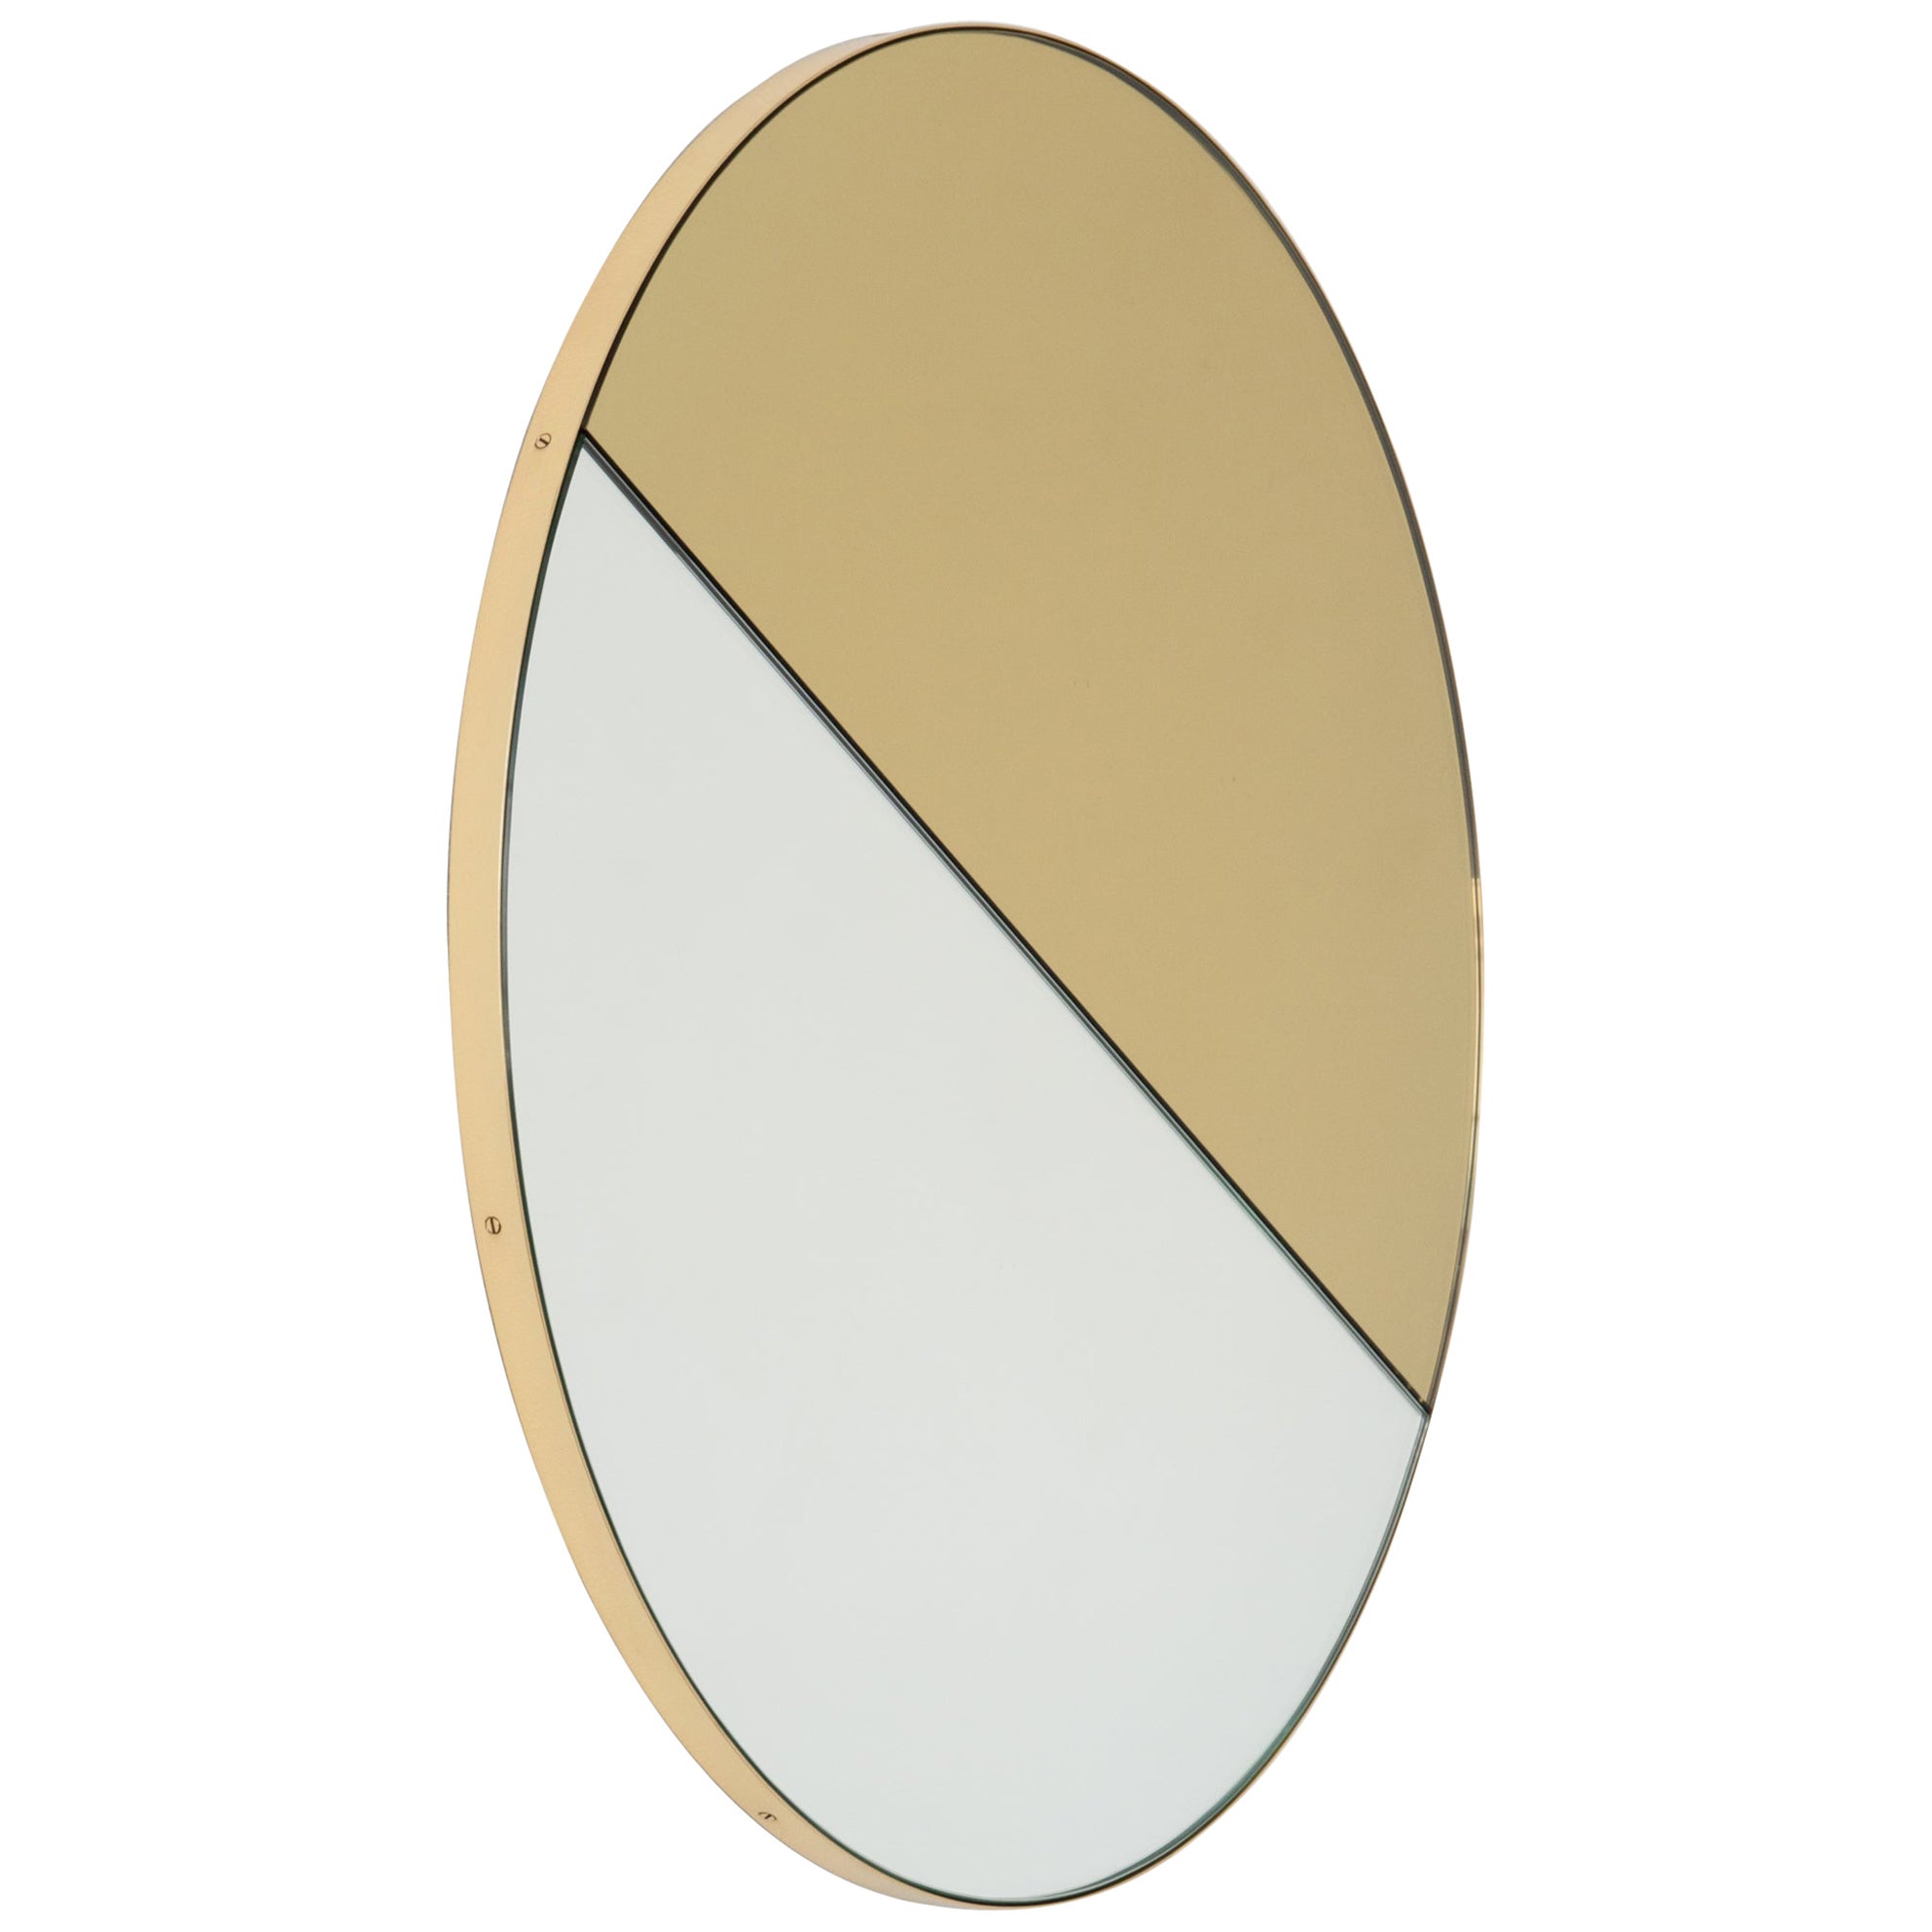 Orbis Dualis Round Mixed Gold Tinted Contemporary Mirror with Brass Frame, XL For Sale